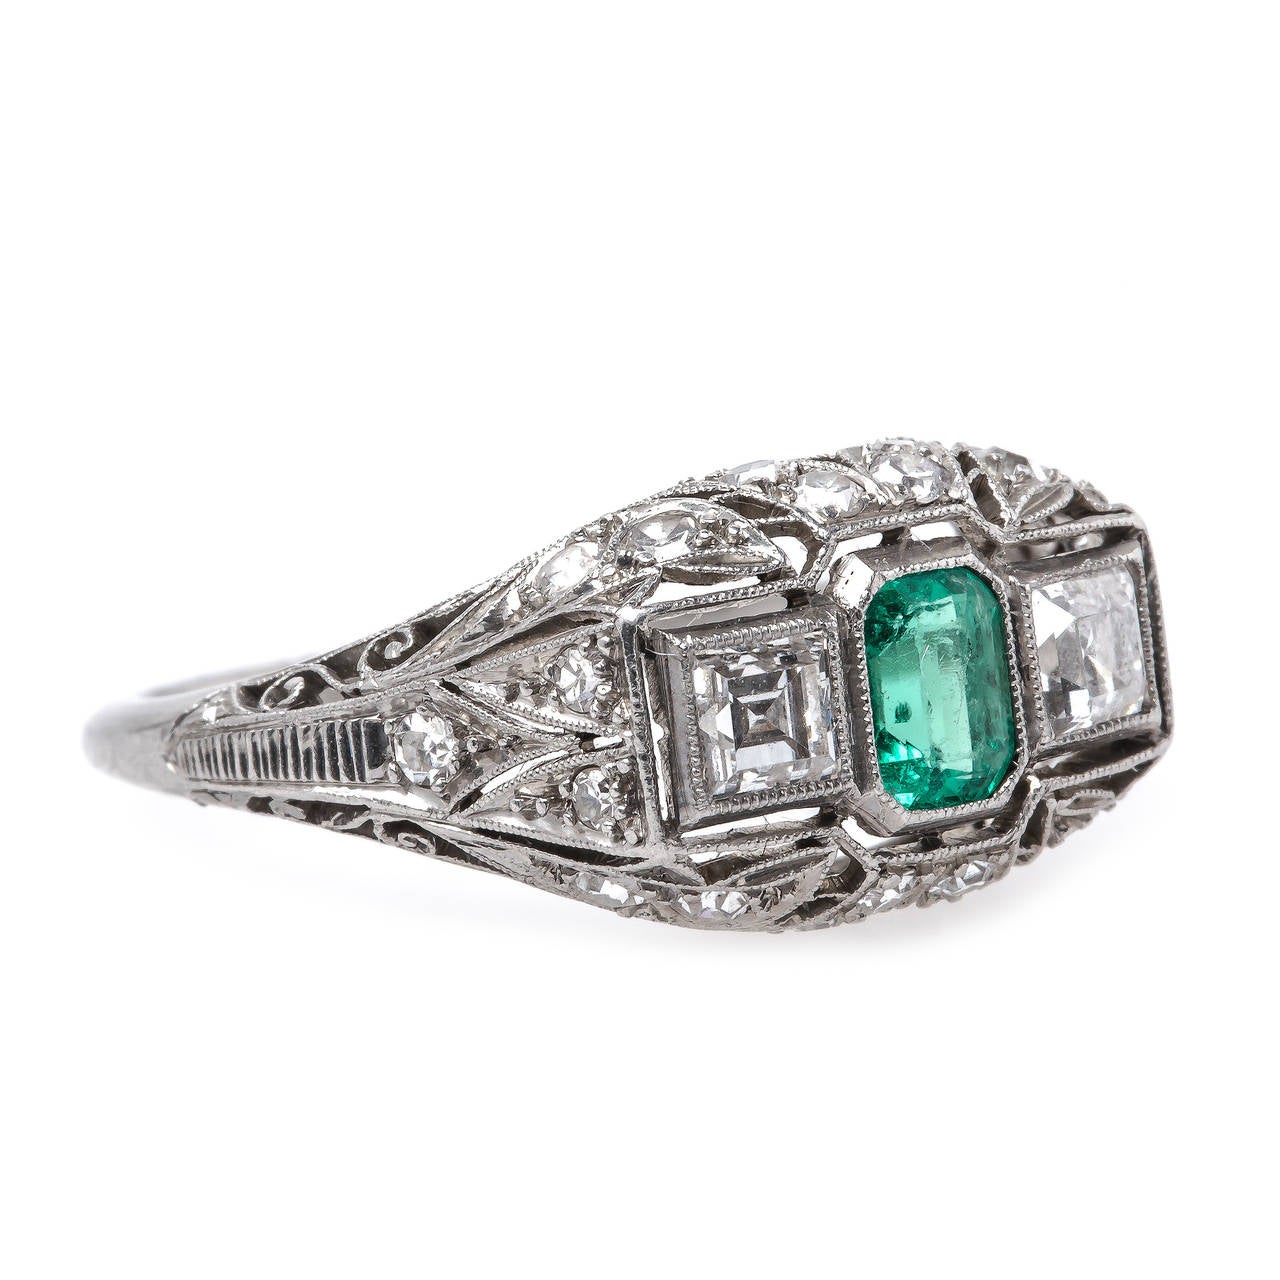 Northbridge is an exceptional example of authentic Edwardian (circa 1915) workmanship.  Made from platinum, this elegant ring centers a bezel set bright green Rectangular Step Cut emerald gauged at 0.45ct flanked by two crisp Square Cut diamonds